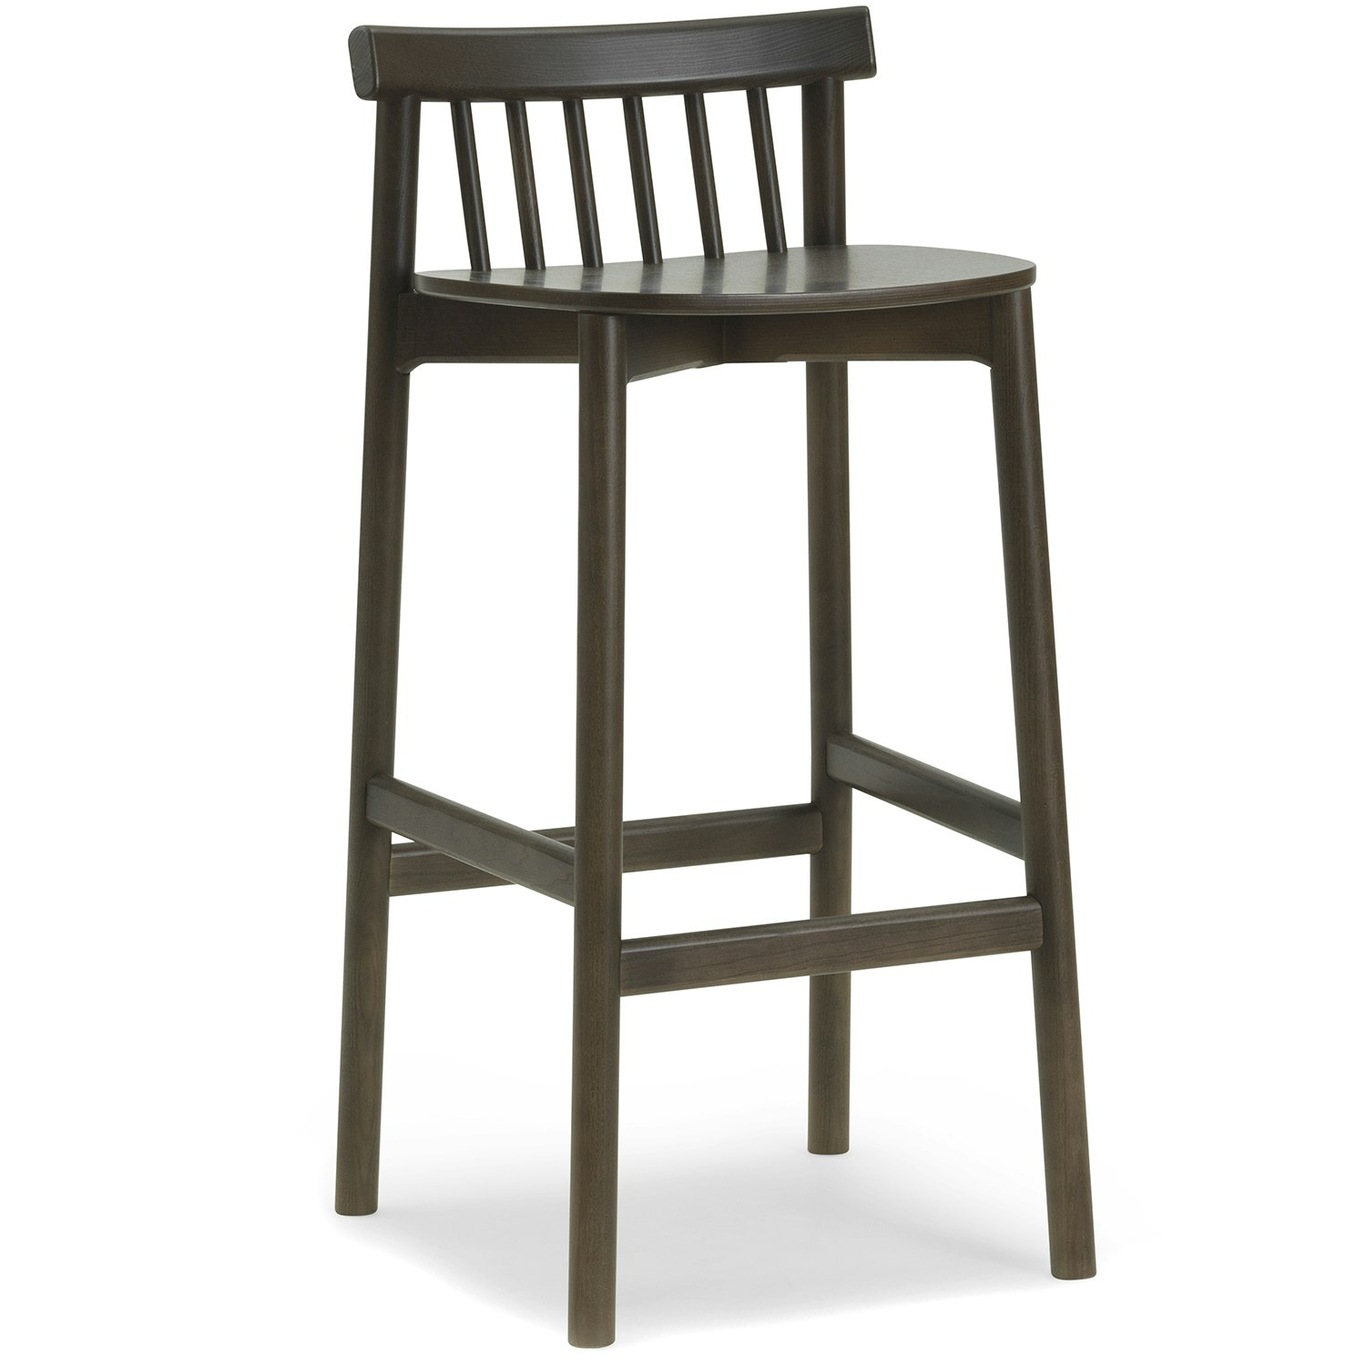 Pind Bar Stool 75 cm, Dark Stained Ash